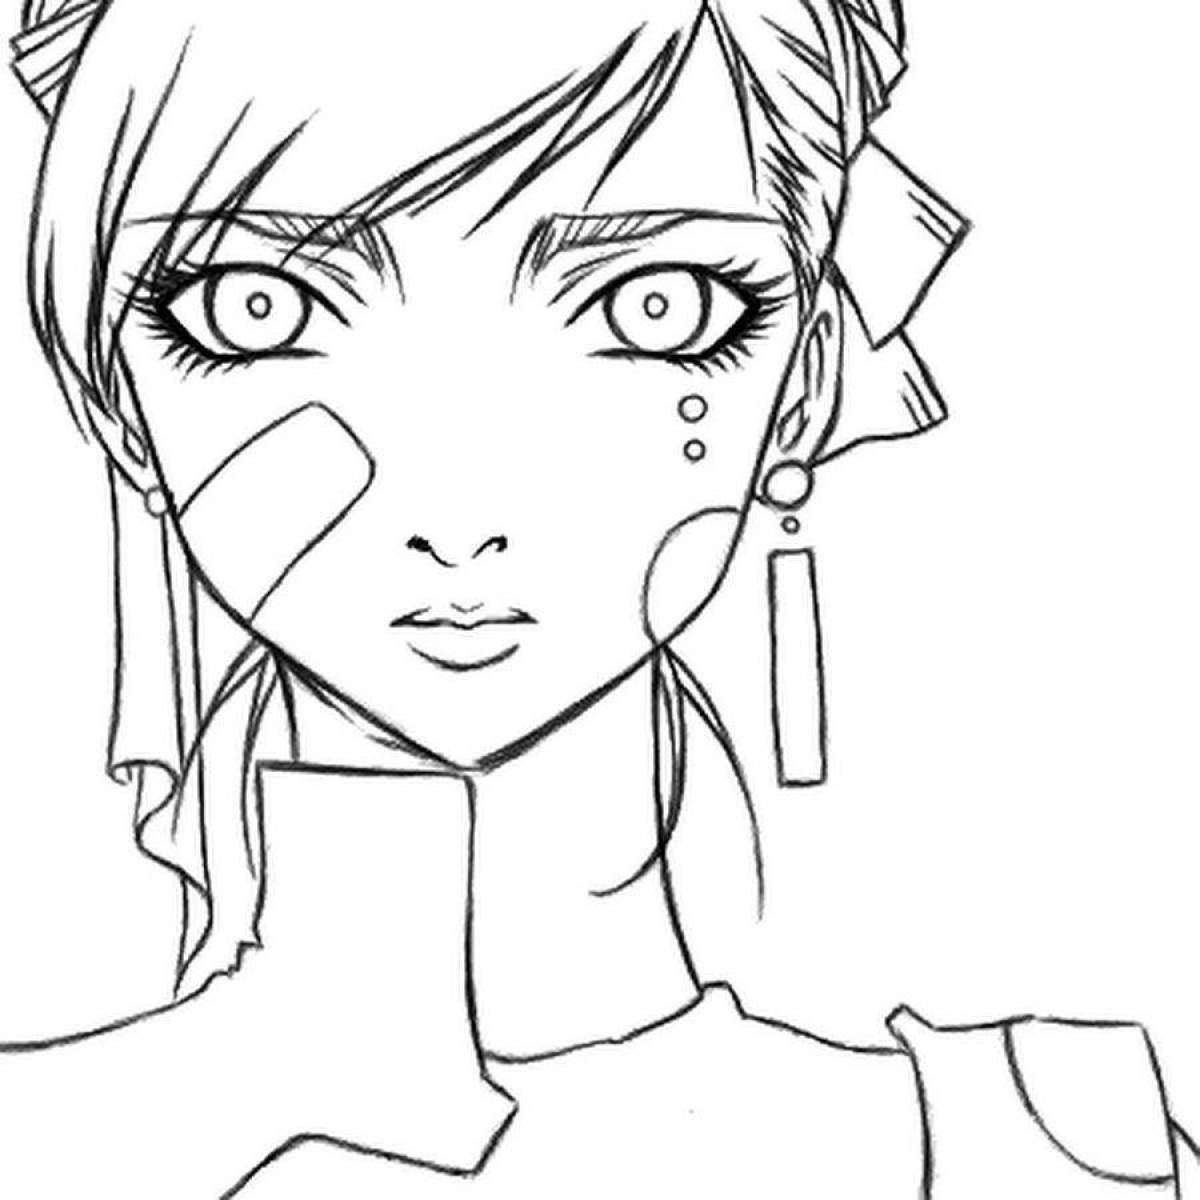 Fabulous anime face coloring page